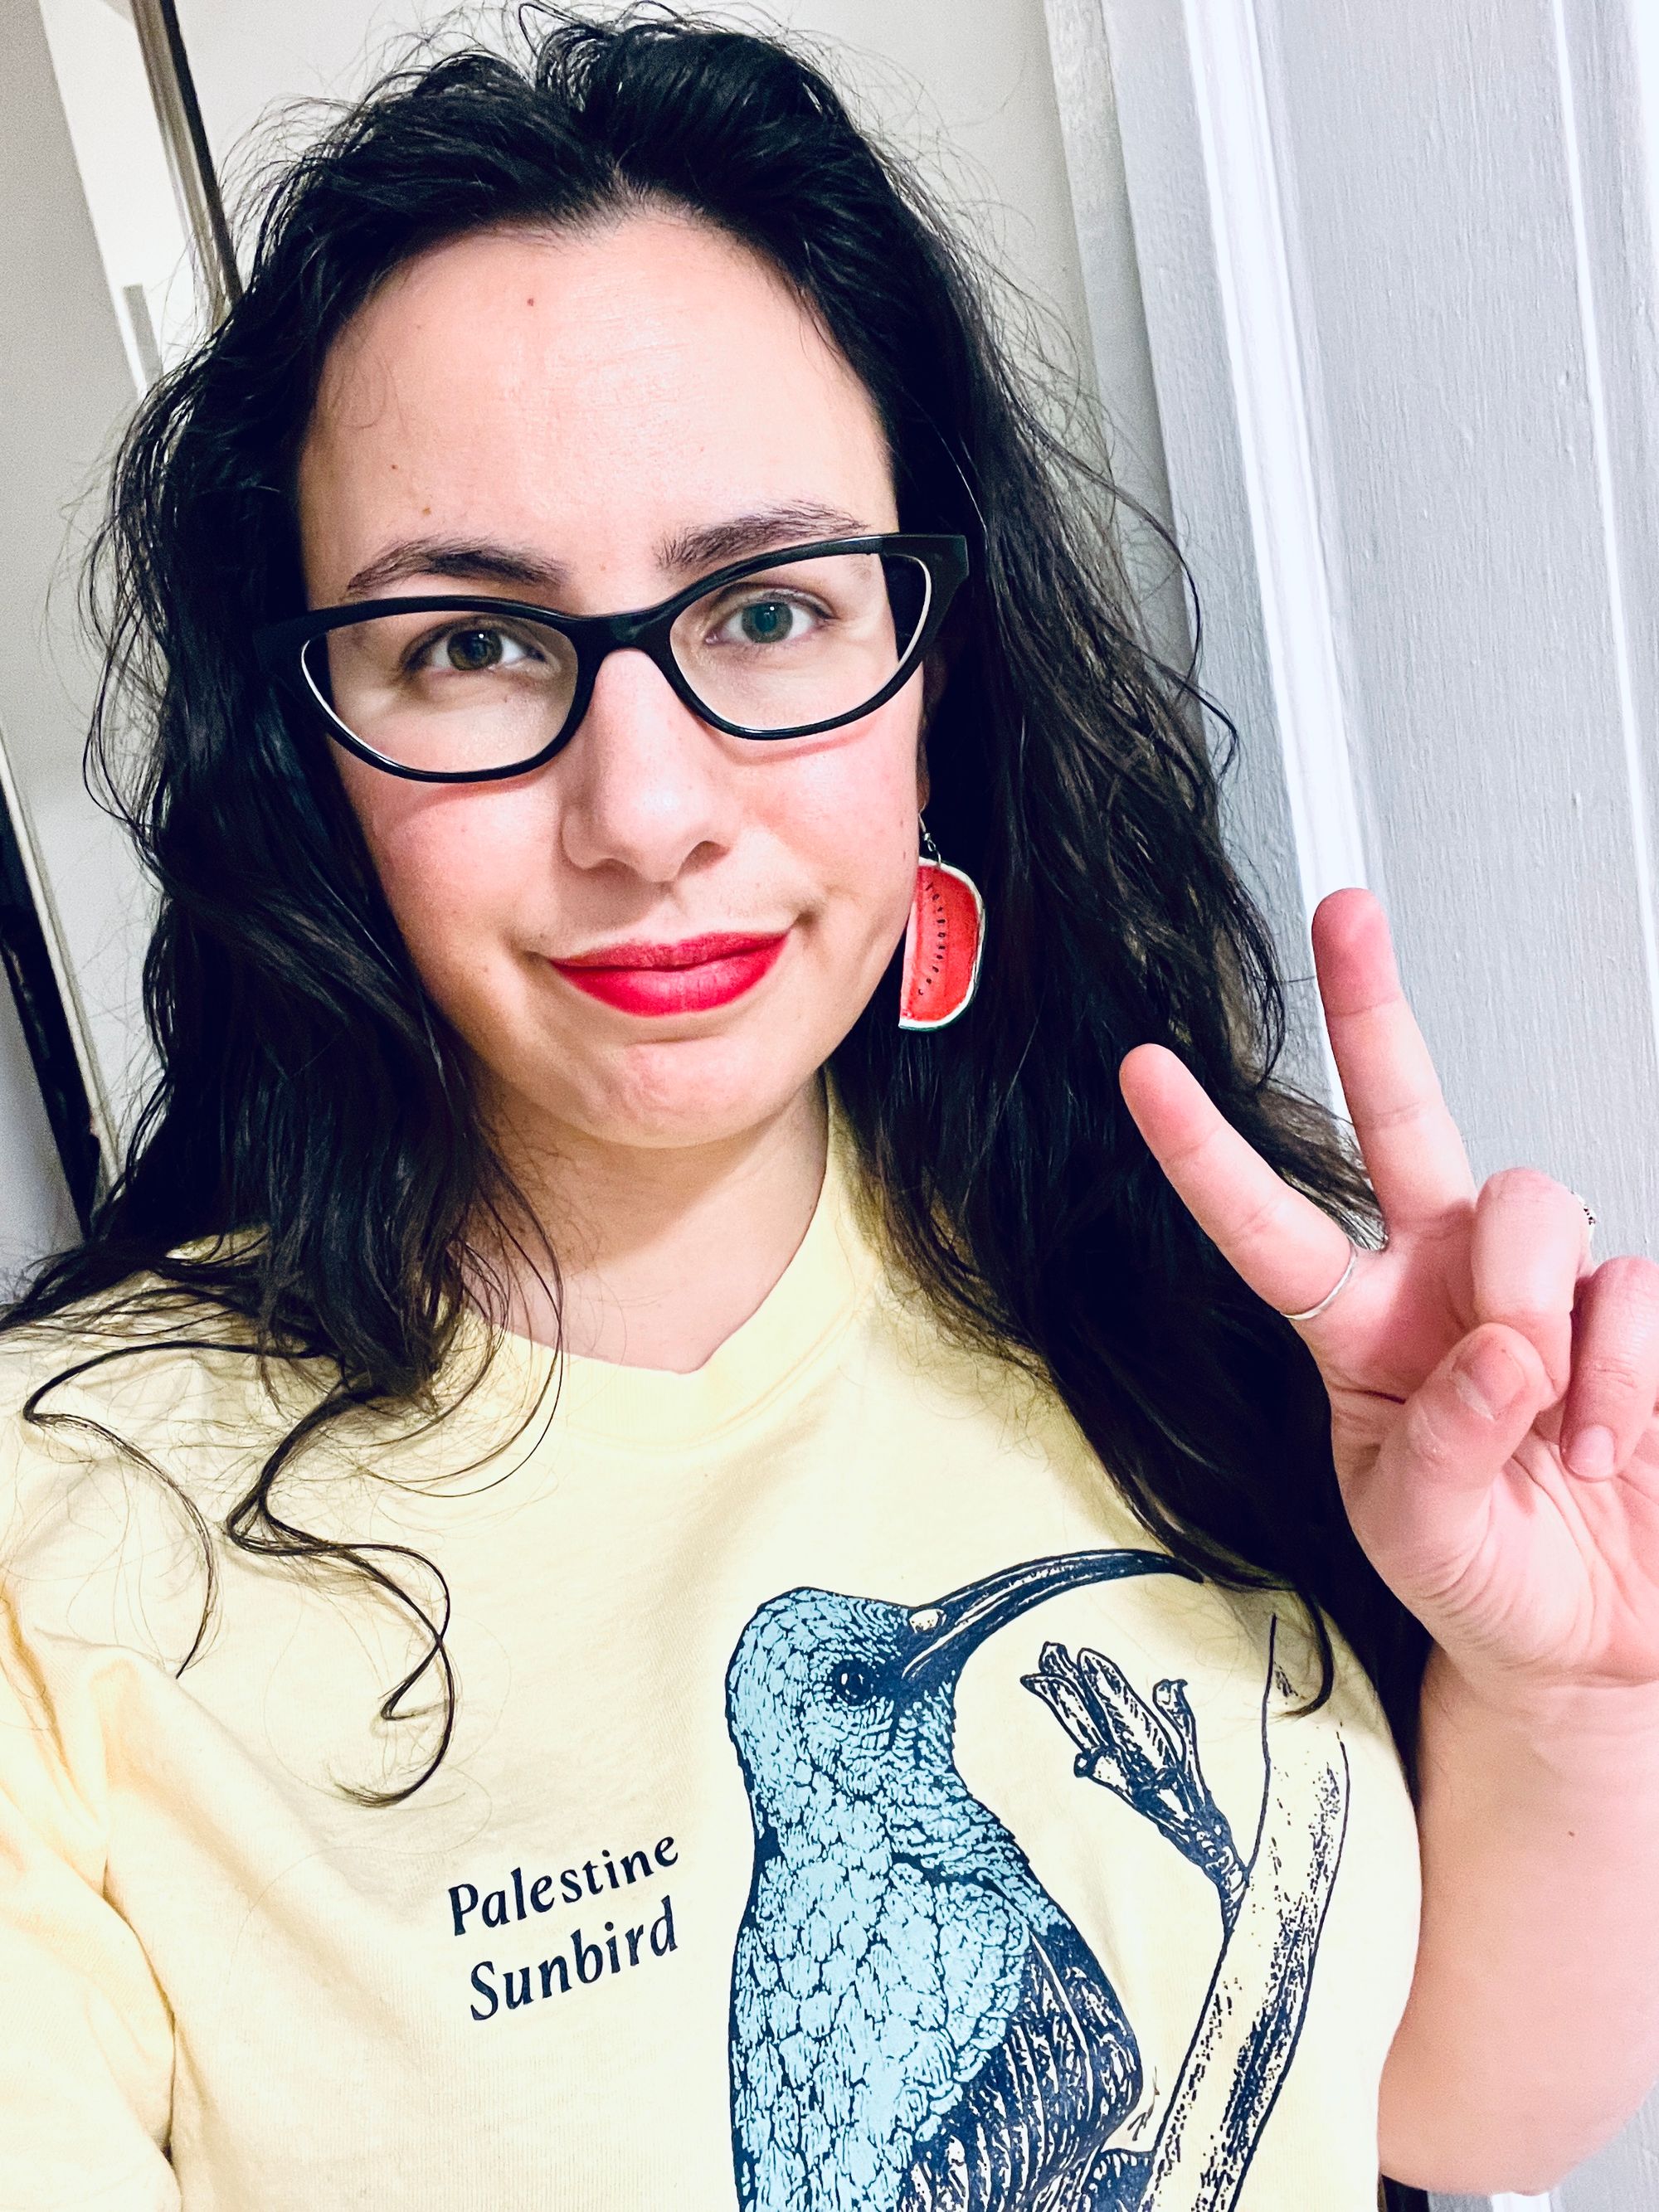 Selfie in which my dark wavy hair is down around my shoulders and spilling over a pale yellow t-shirt depicting a Palestine Sunbird. I'm wearing watermelon-slice earrings and raising two fingers in a peace sign.